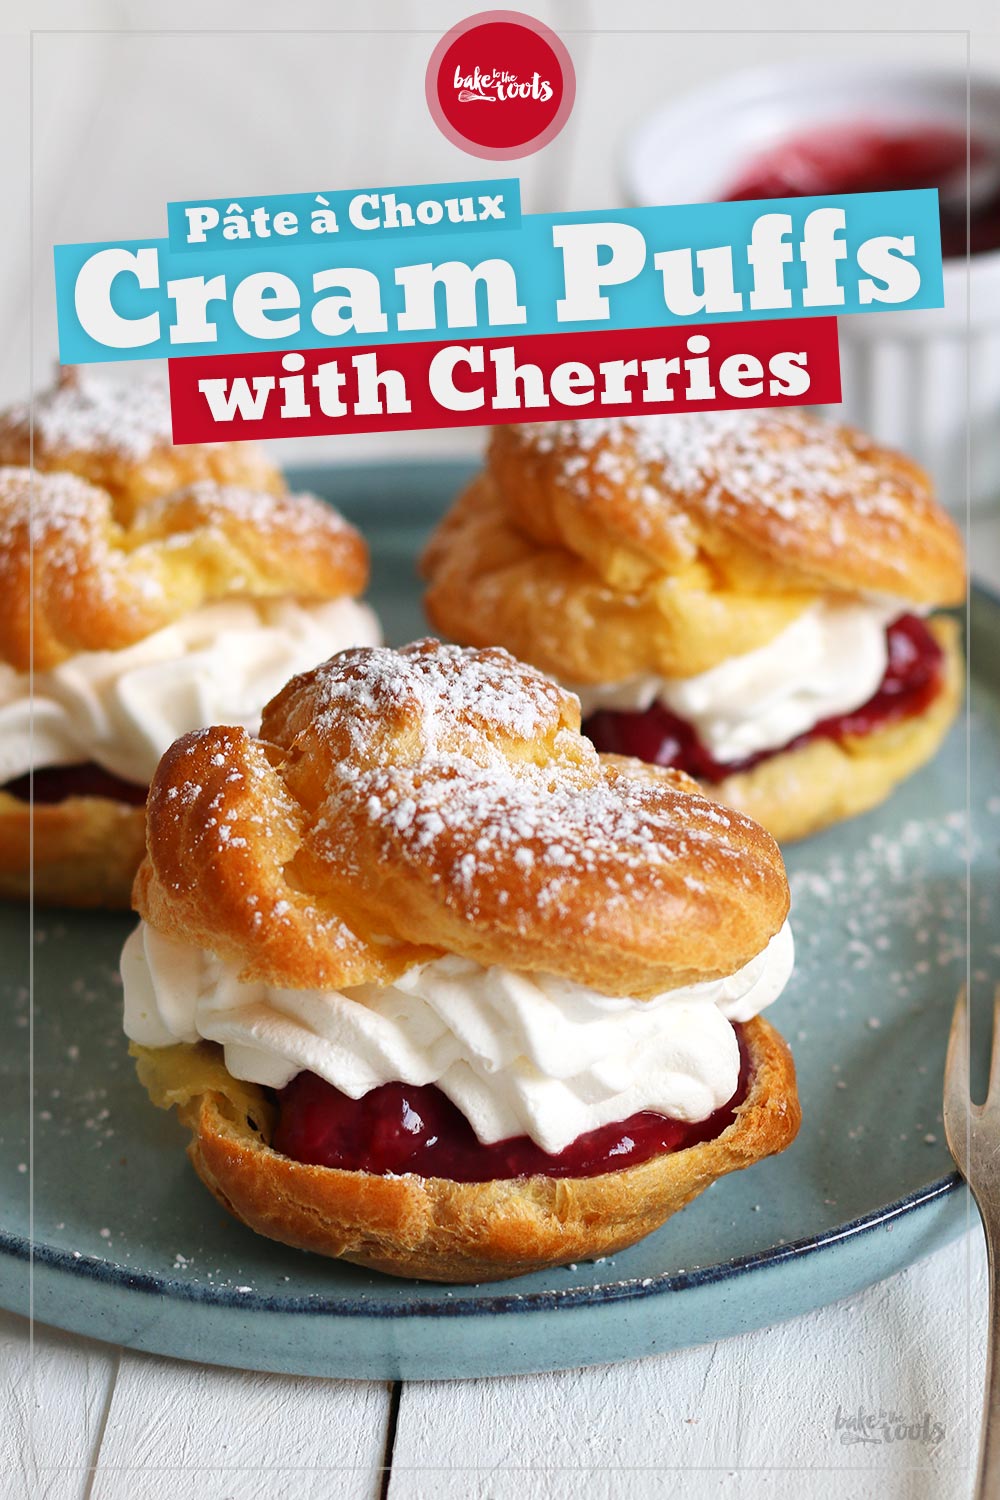 Cream Puffs with Cherries | Bake to the roots